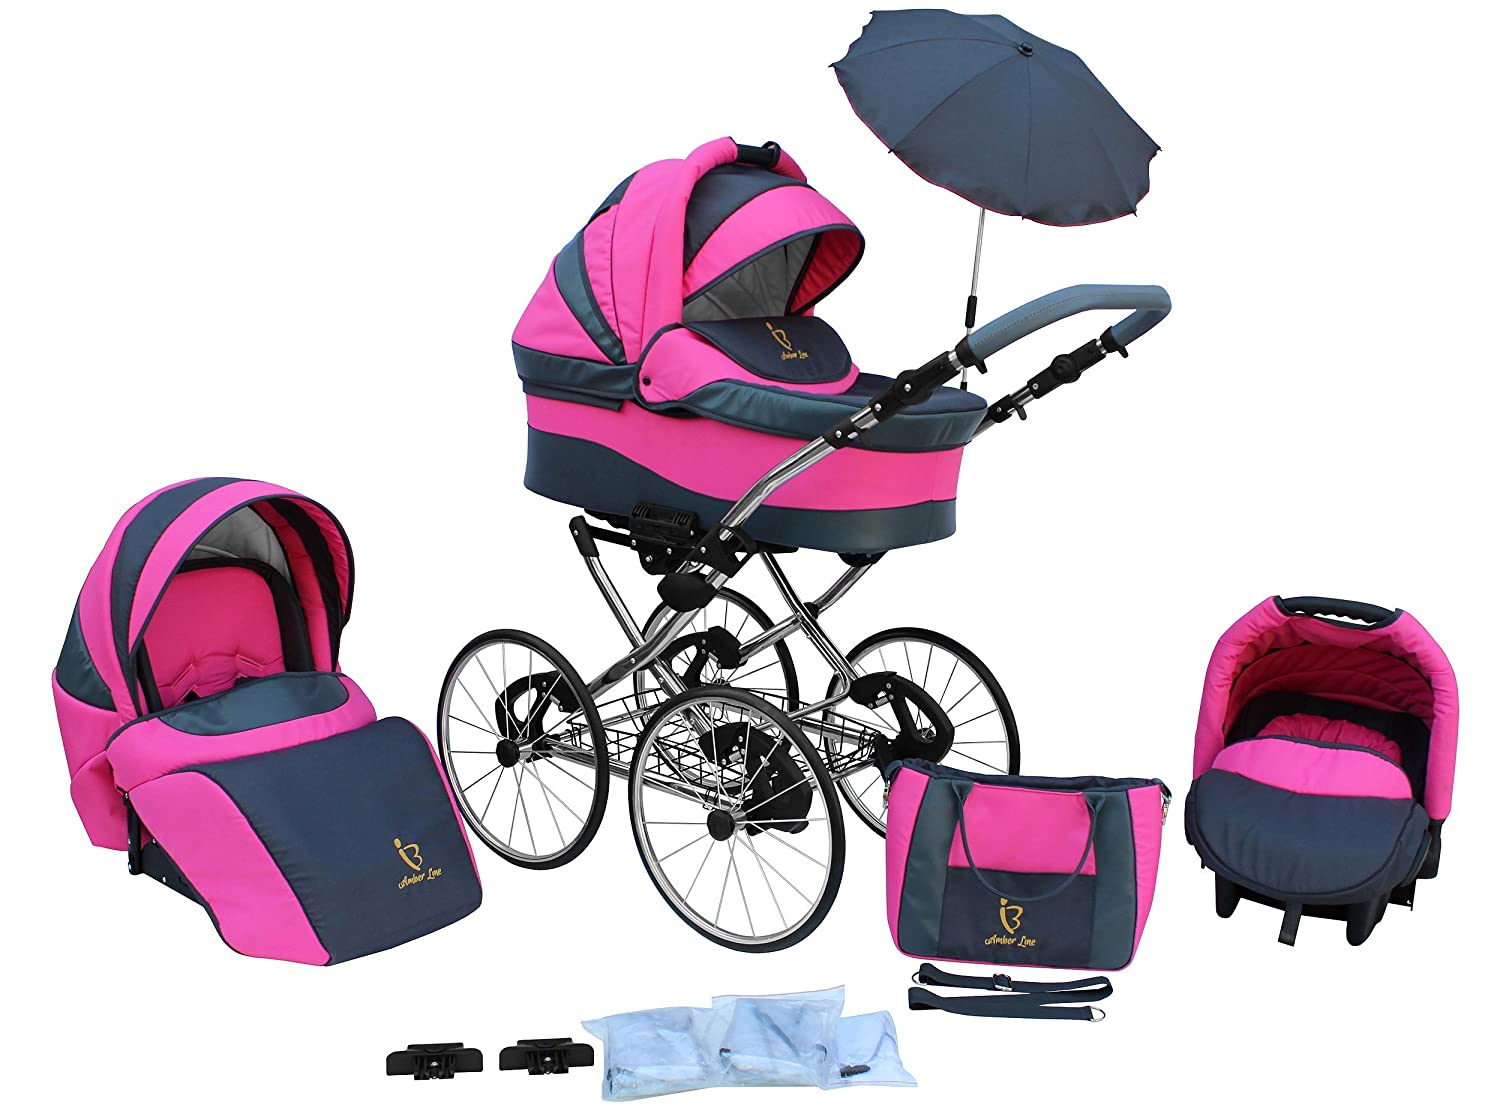 SKYLINE Classic Retro Style Combination Pram Buggy 3-in-1 Travel System Car Seat (Isofix) (Pink/17 Inch Hard Rubber Tyres)